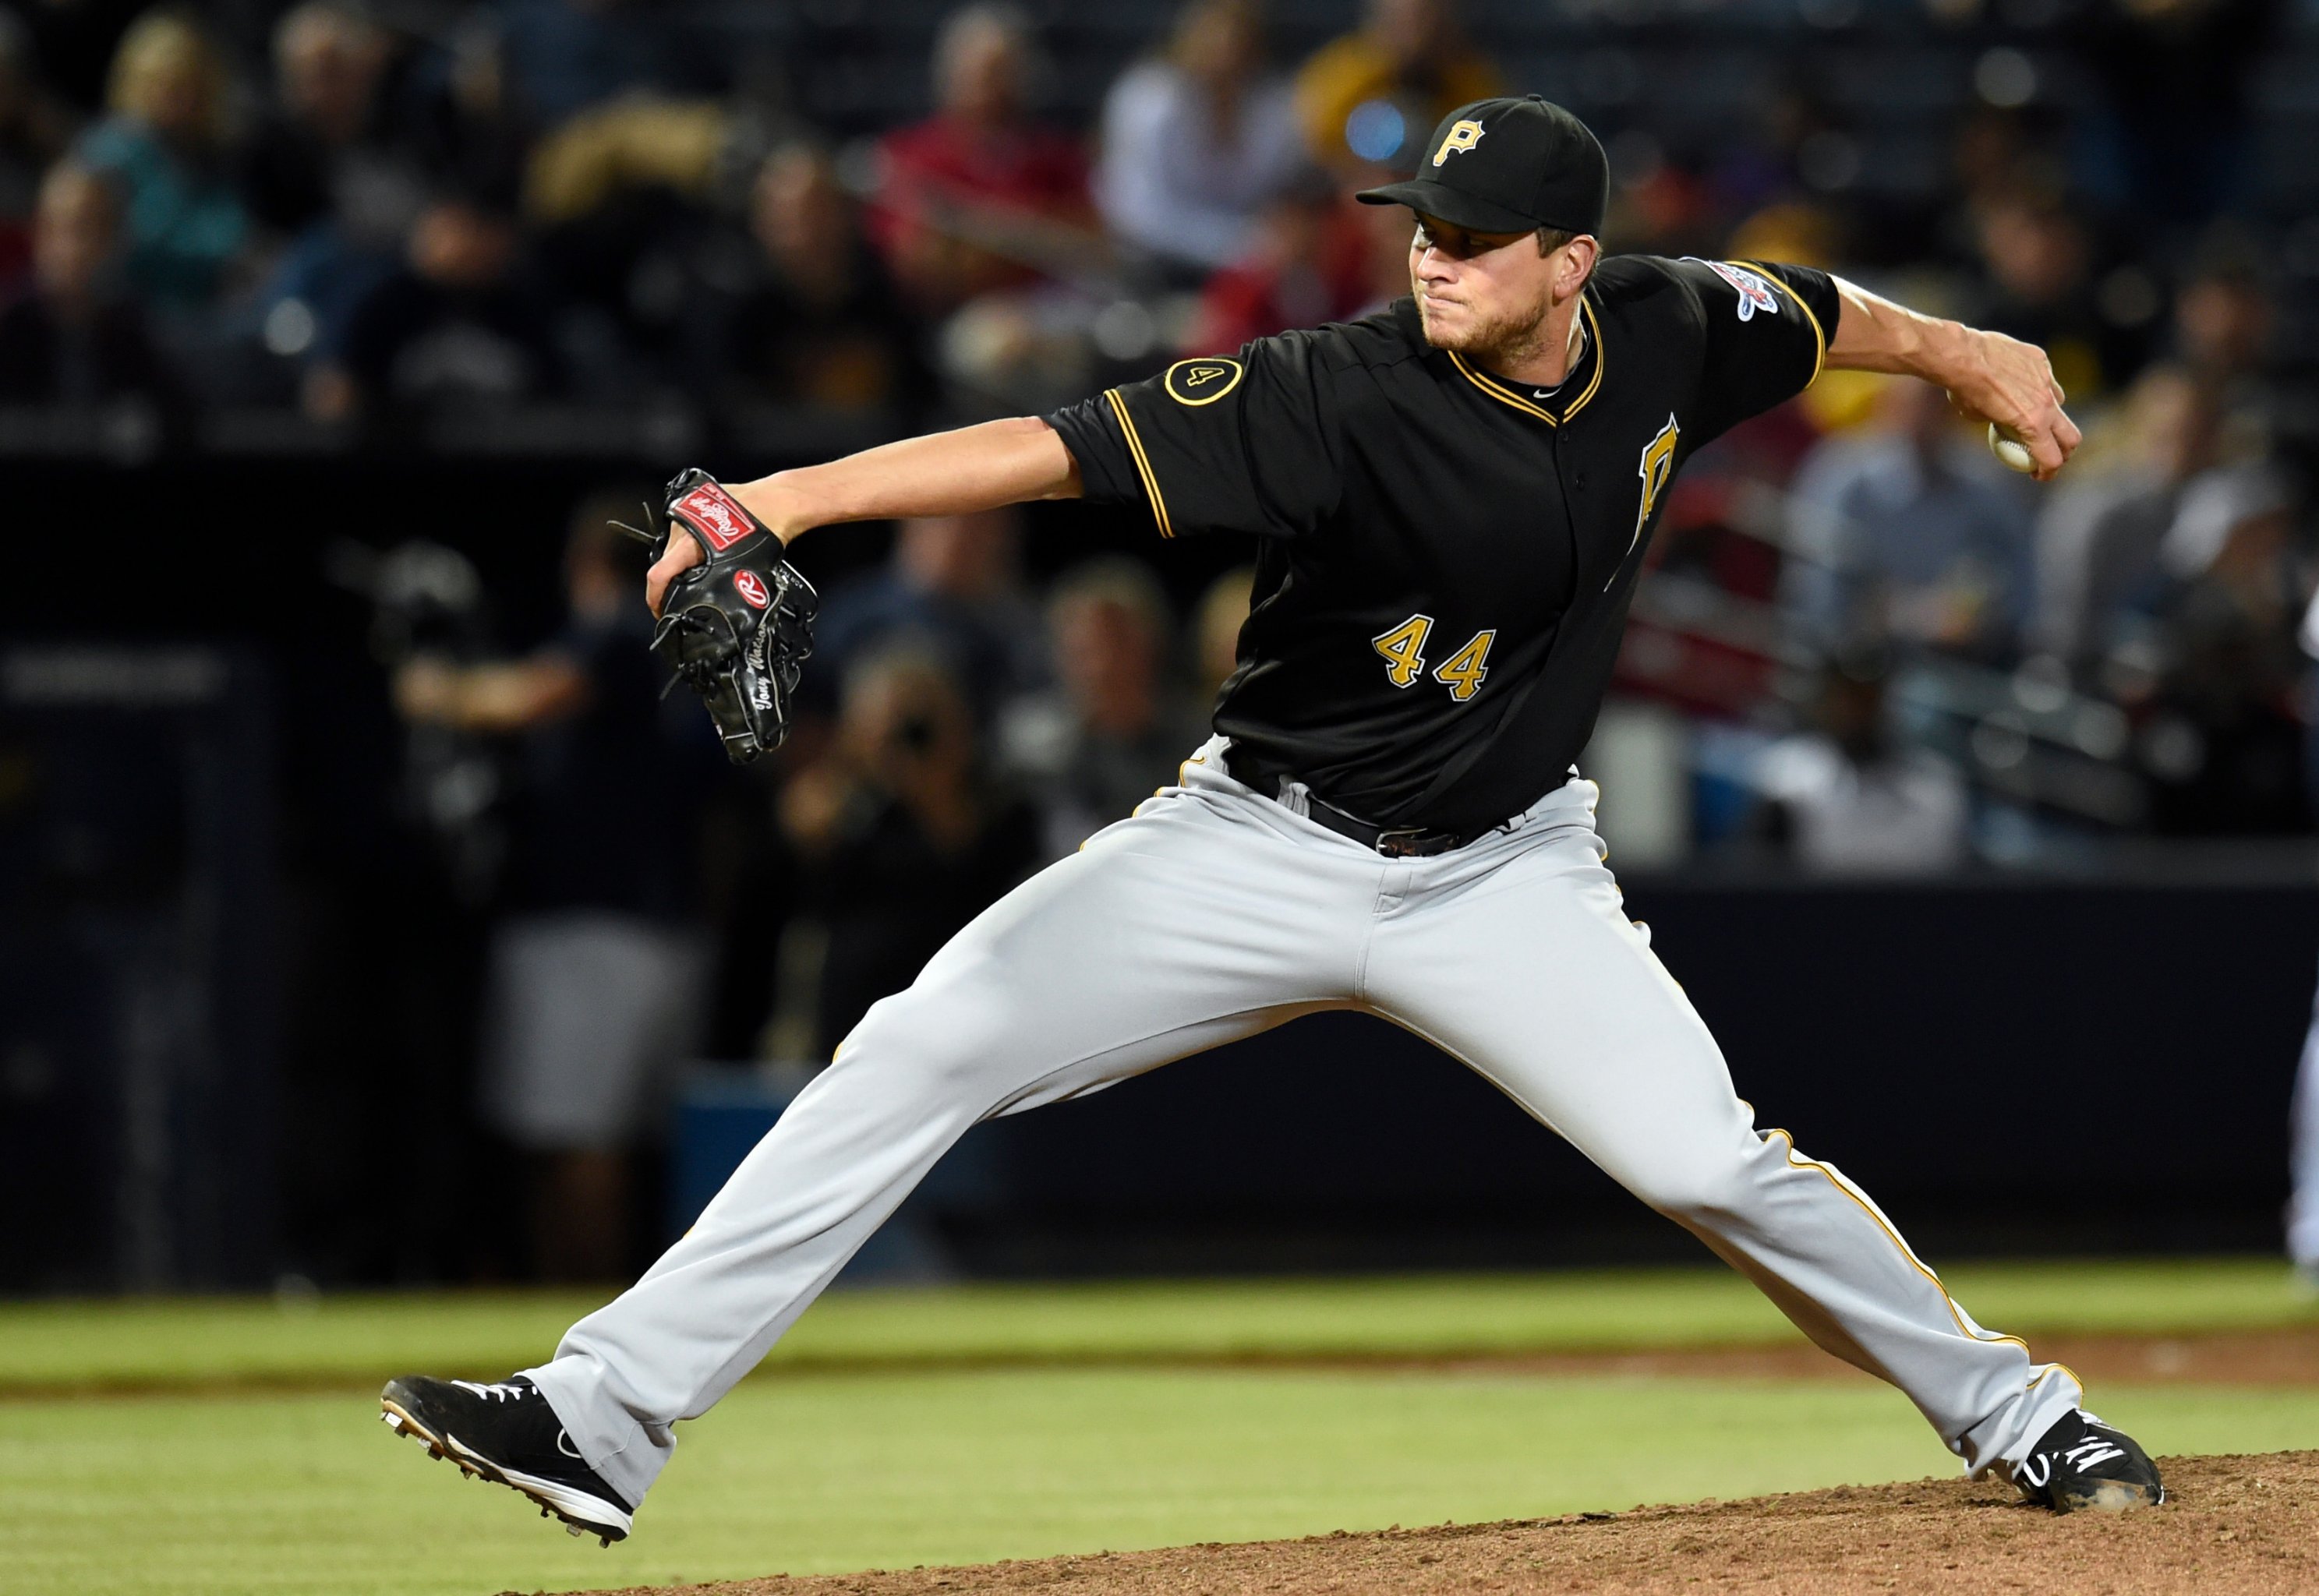 Pirates' Gerrit Cole could be next elite pitcher in 2015 - Sports